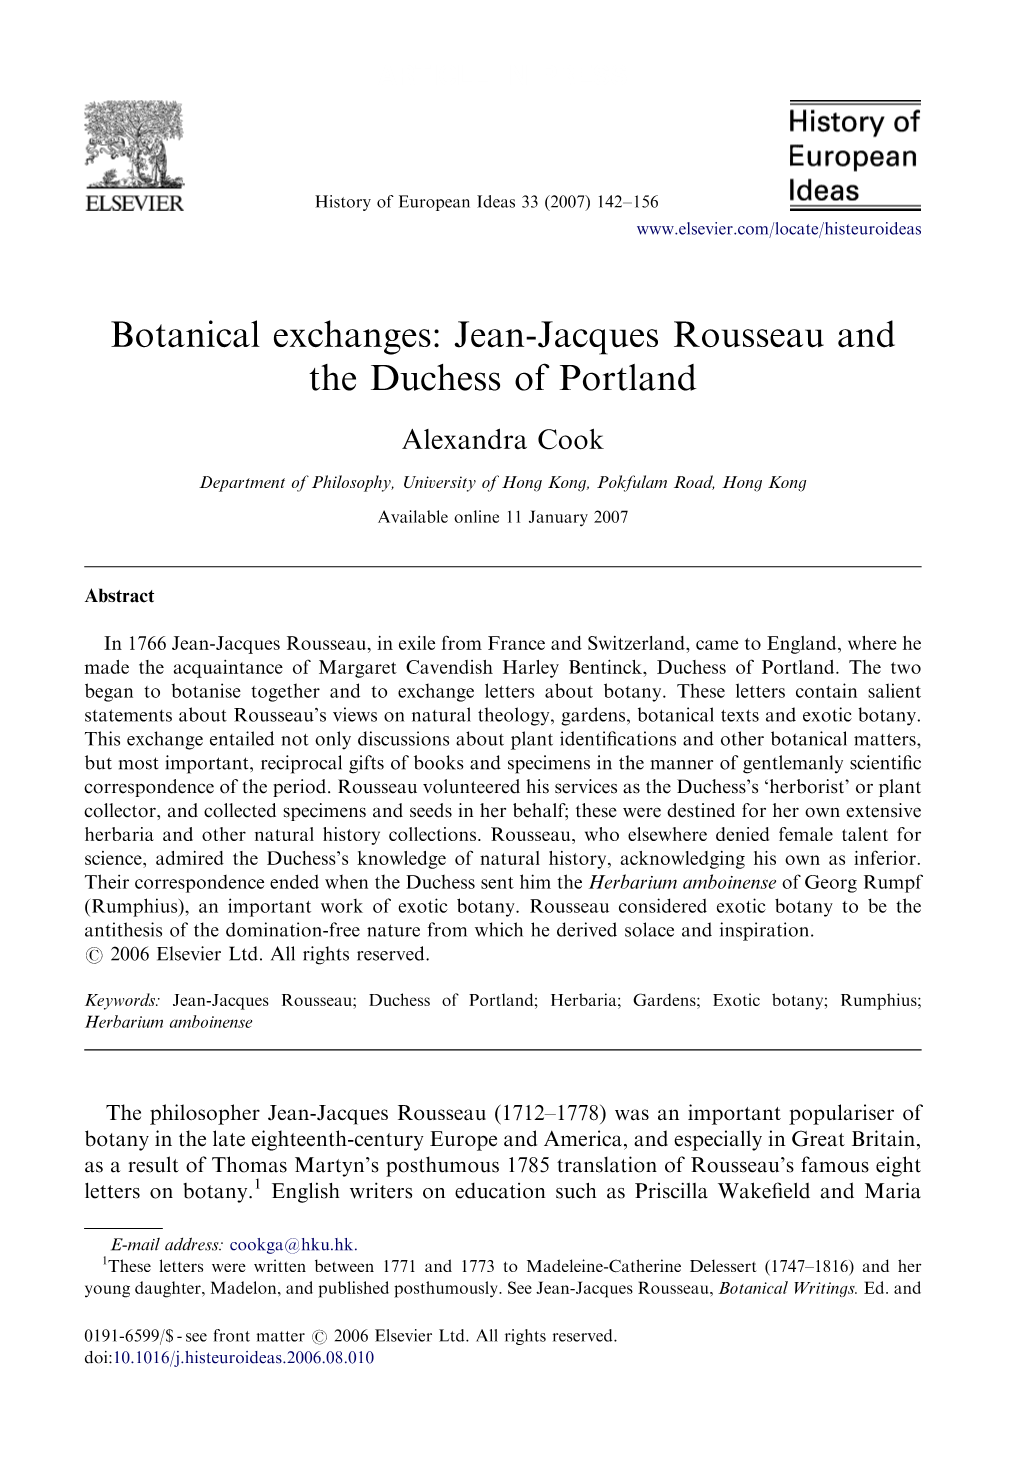 Botanical Exchanges: Jean-Jacques Rousseau and the Duchess of Portland